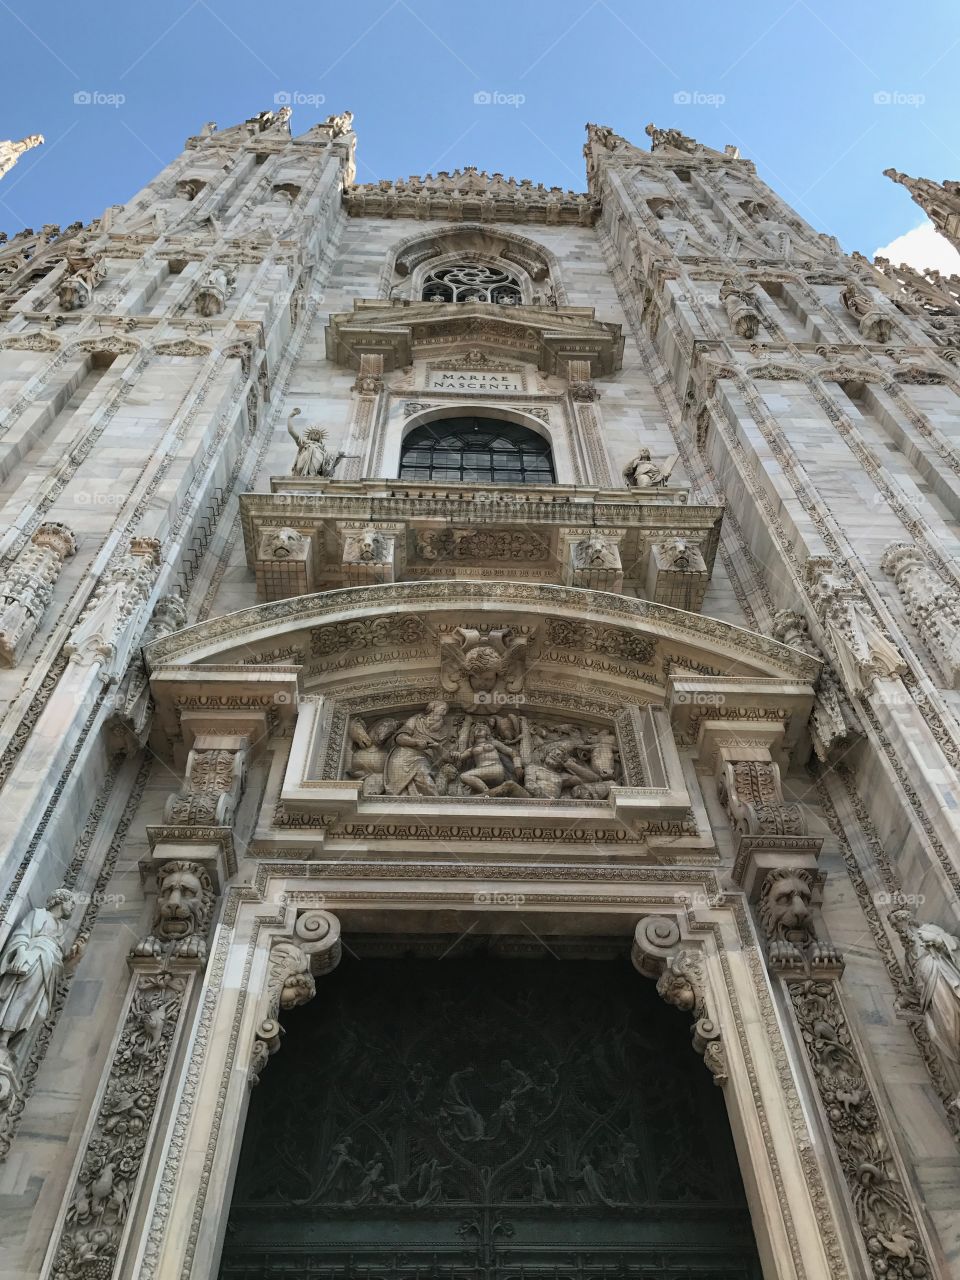 Entrance of Duomo, Milan Italy, marble, carvings, and sculpture 